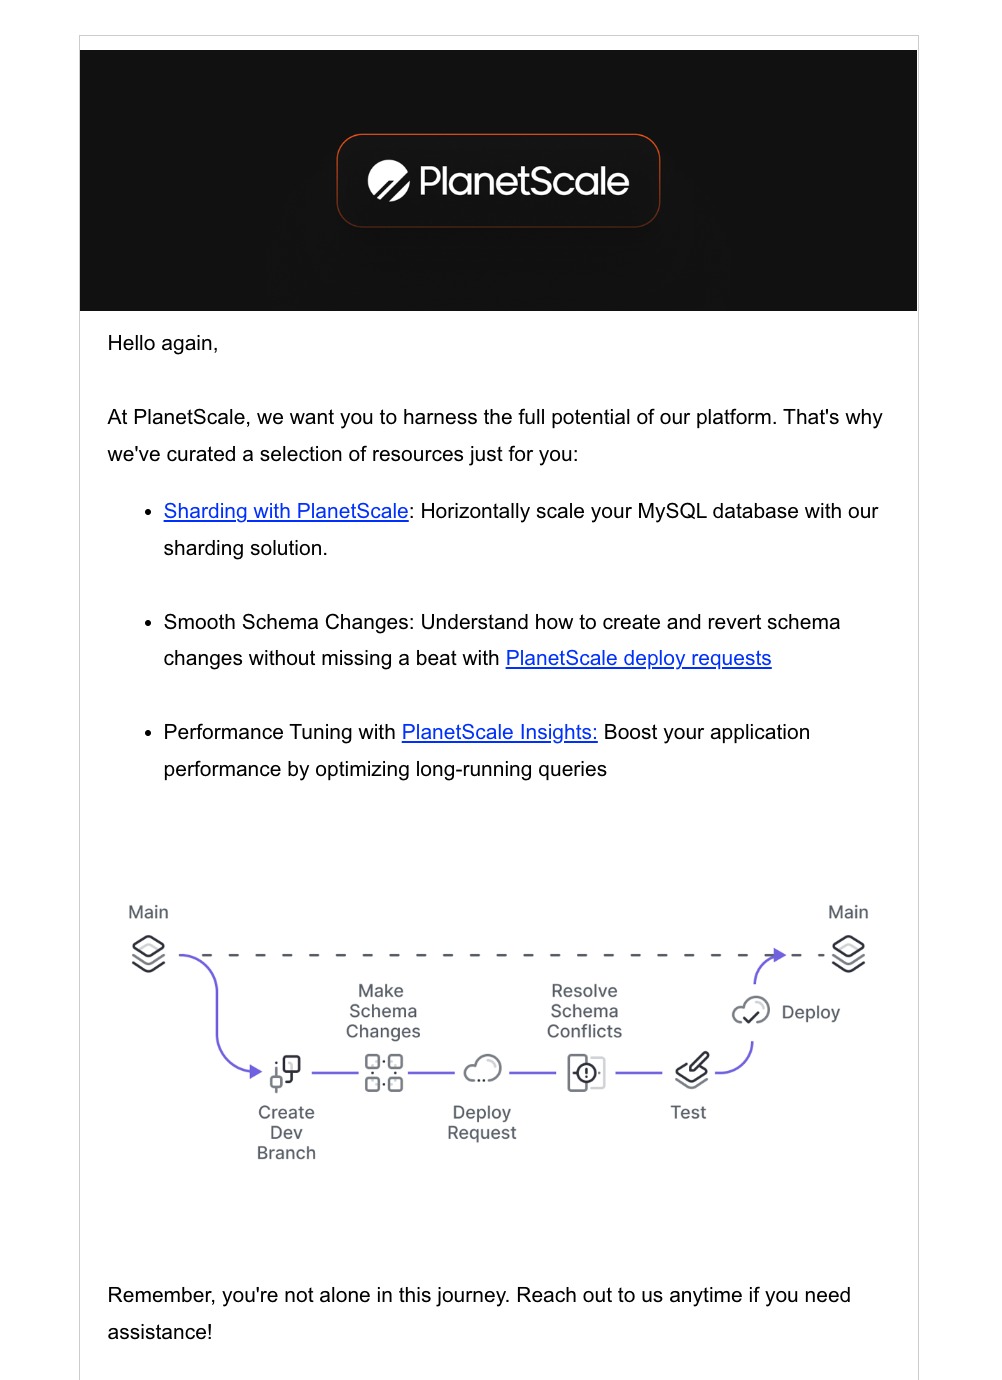 Email Marketing for Devtools: Screenshot of PlanetScale's email featuring a diagram